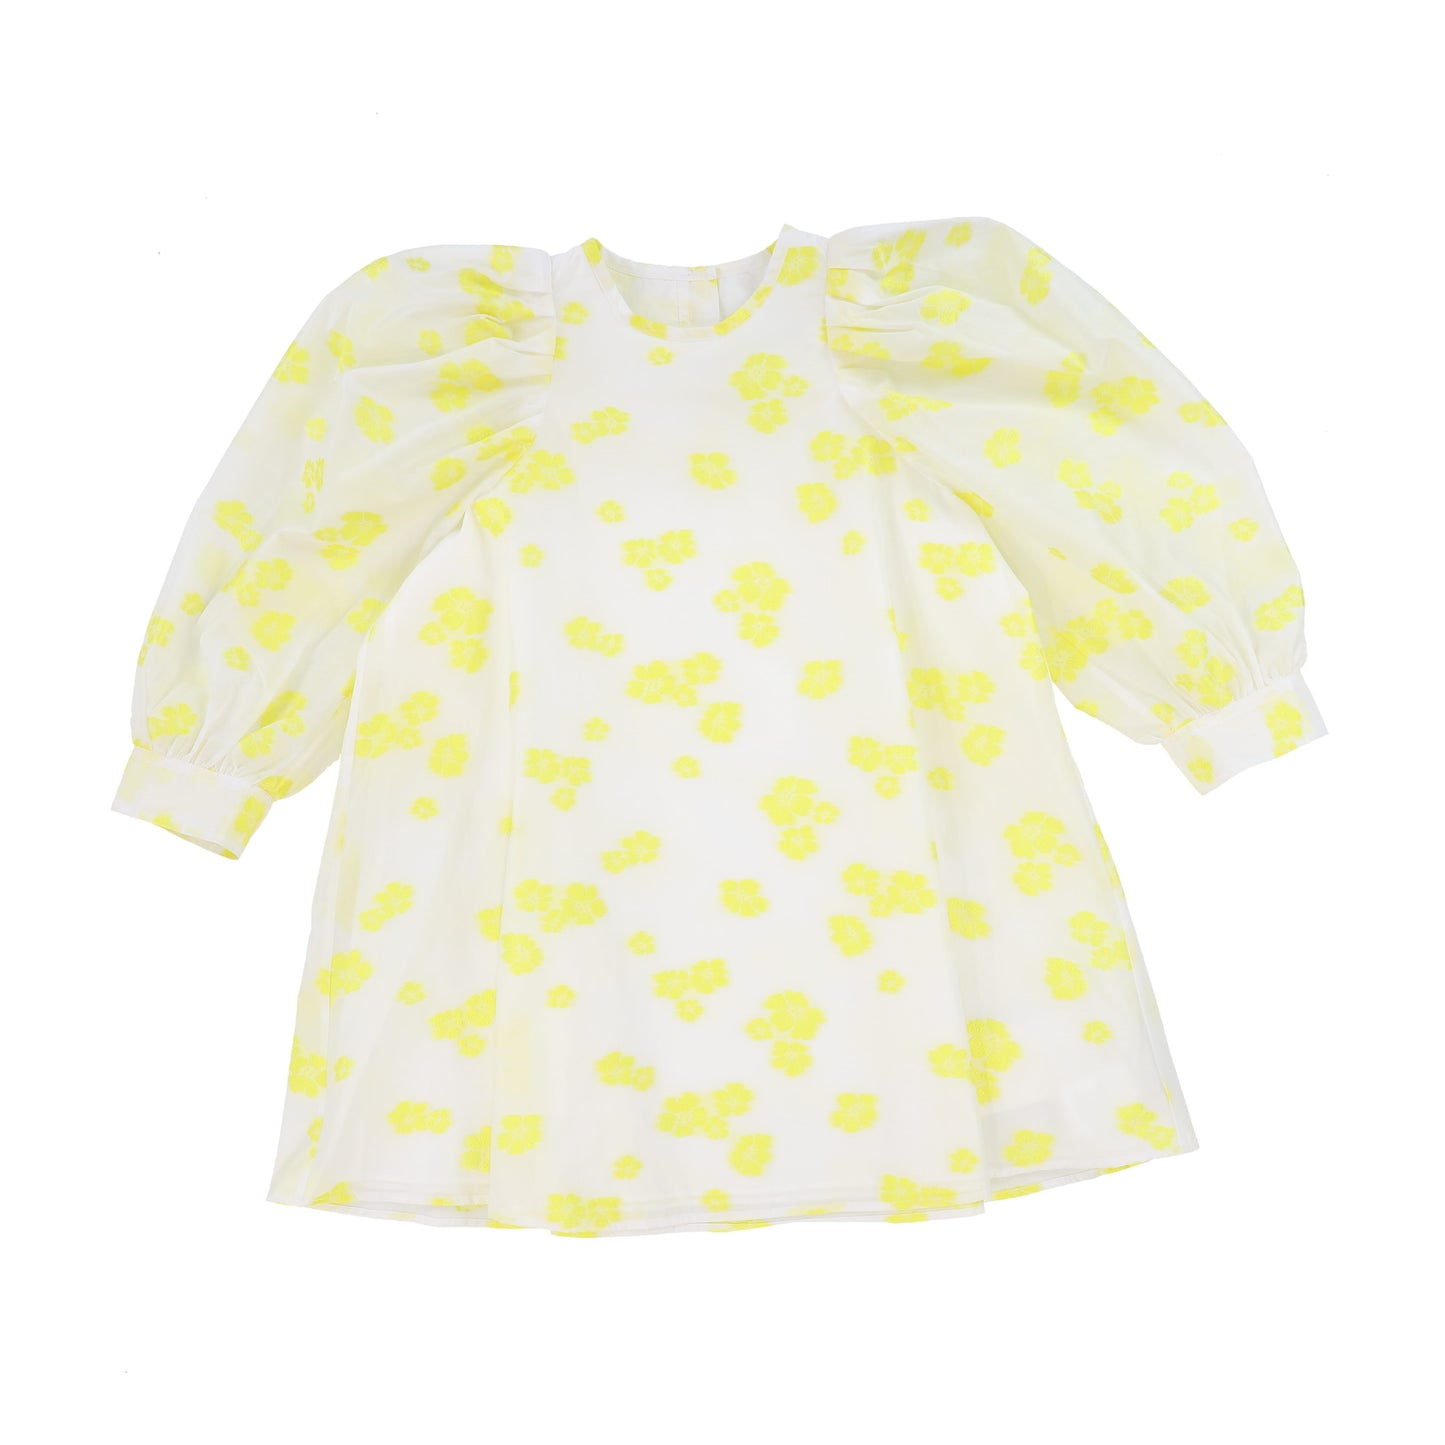 JNBY WHITE/ YELLOW FLORAL PUFF SLEEVE DRESS [FINAL SALE]